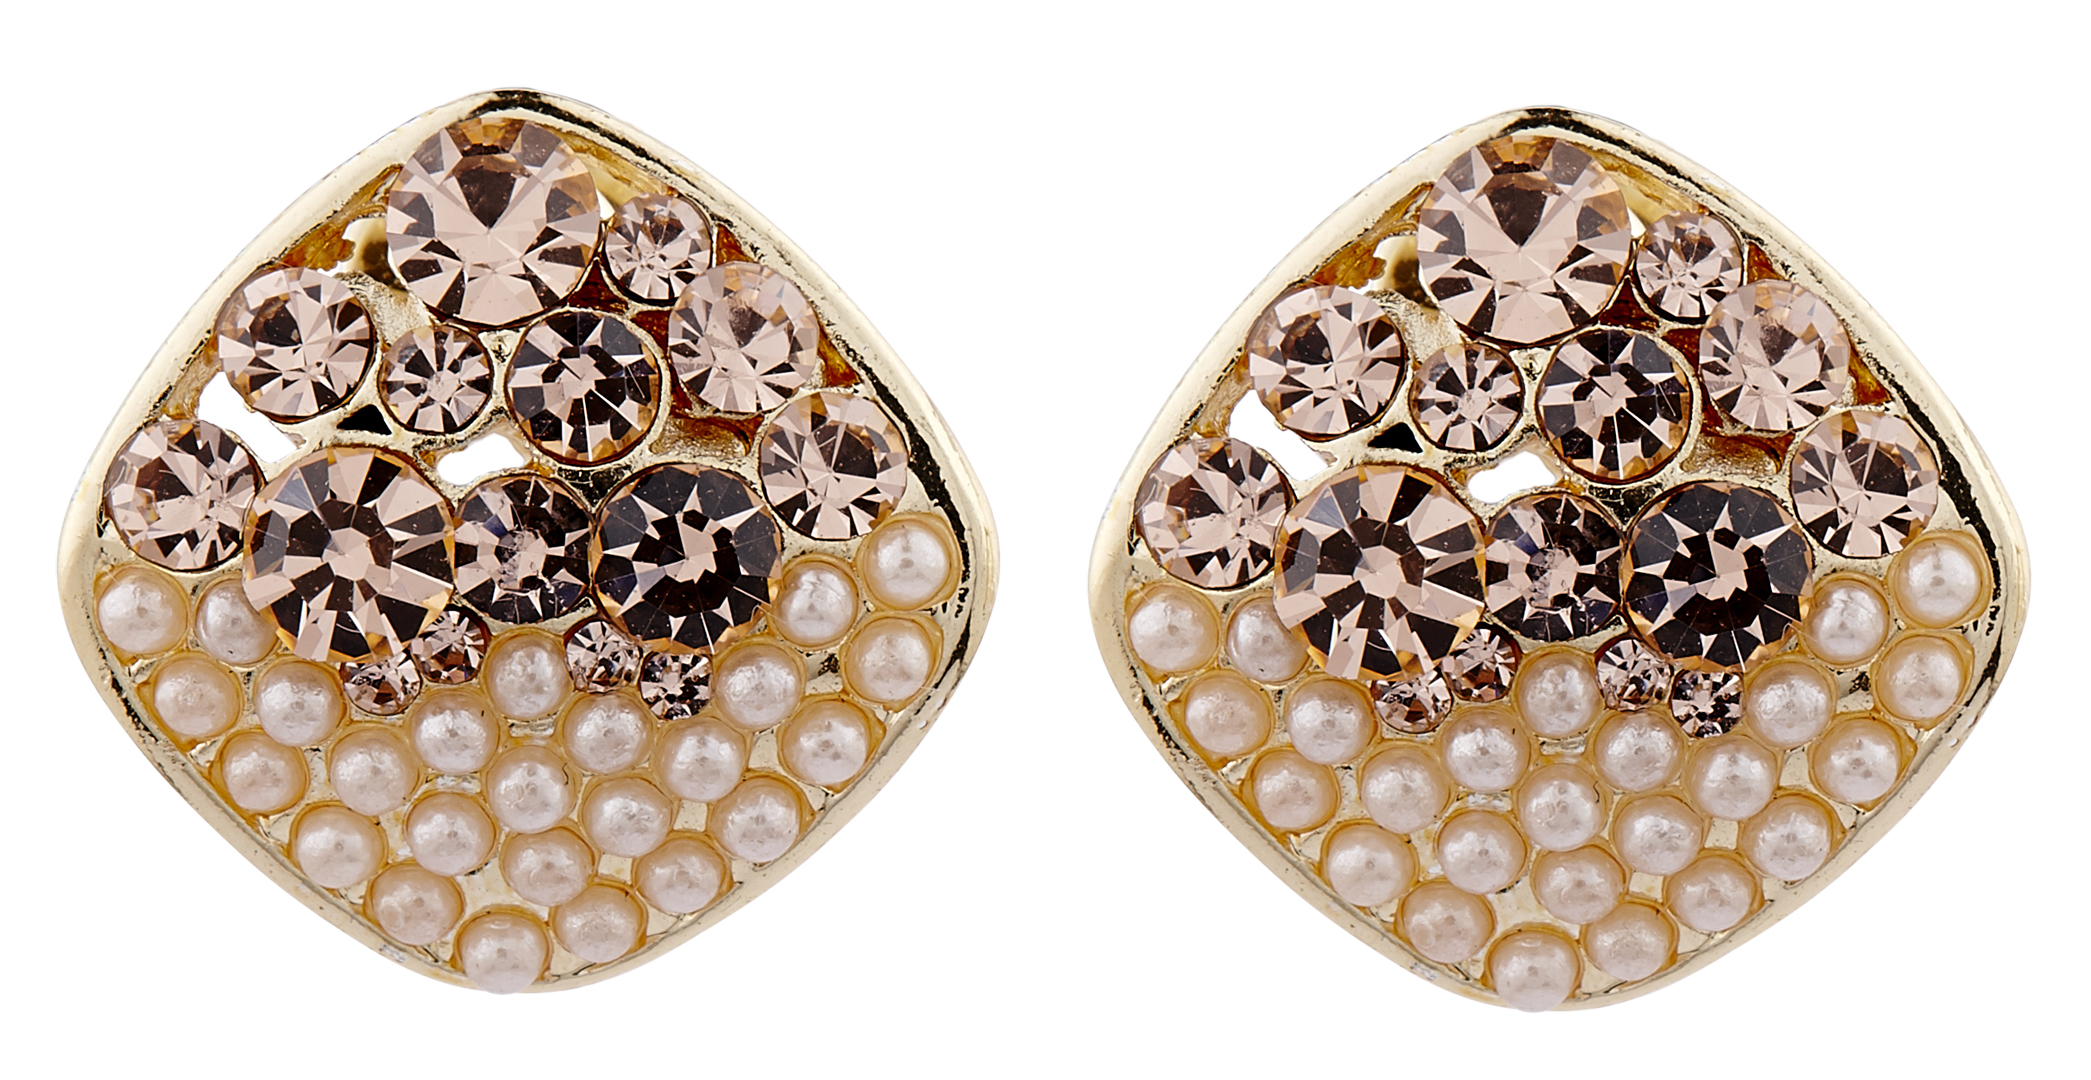 Clip On Earrings - Emma GP - gold stud earring with pearls and gold crystals